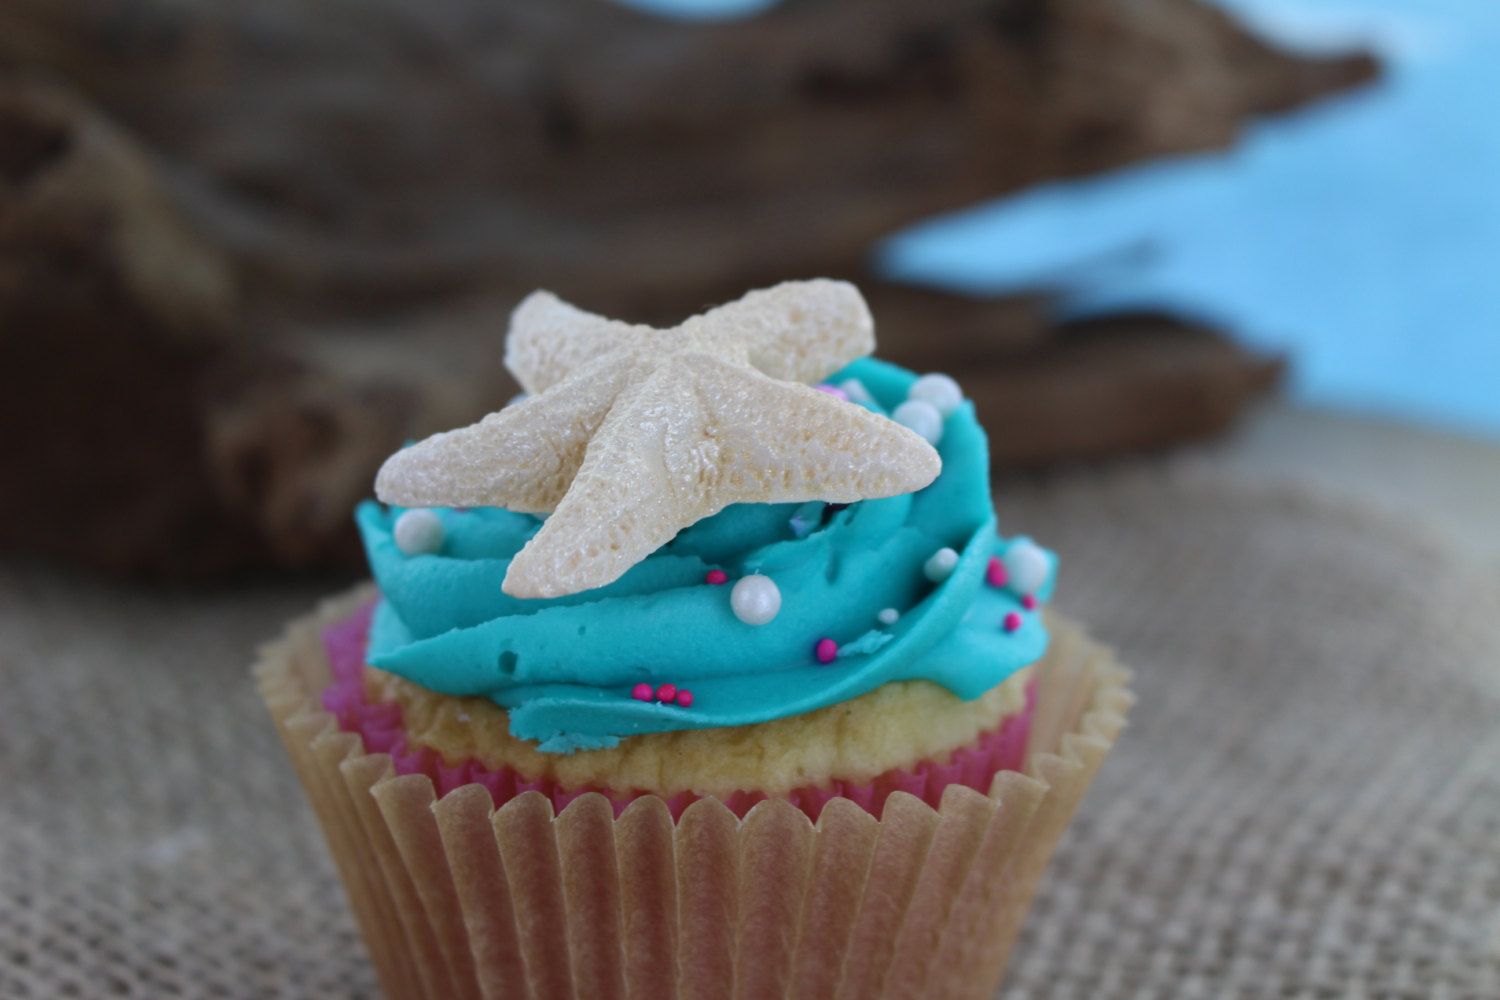 Top cupcakes or a store-bought cake with edible seashell candies for a creative pirate party treat idea